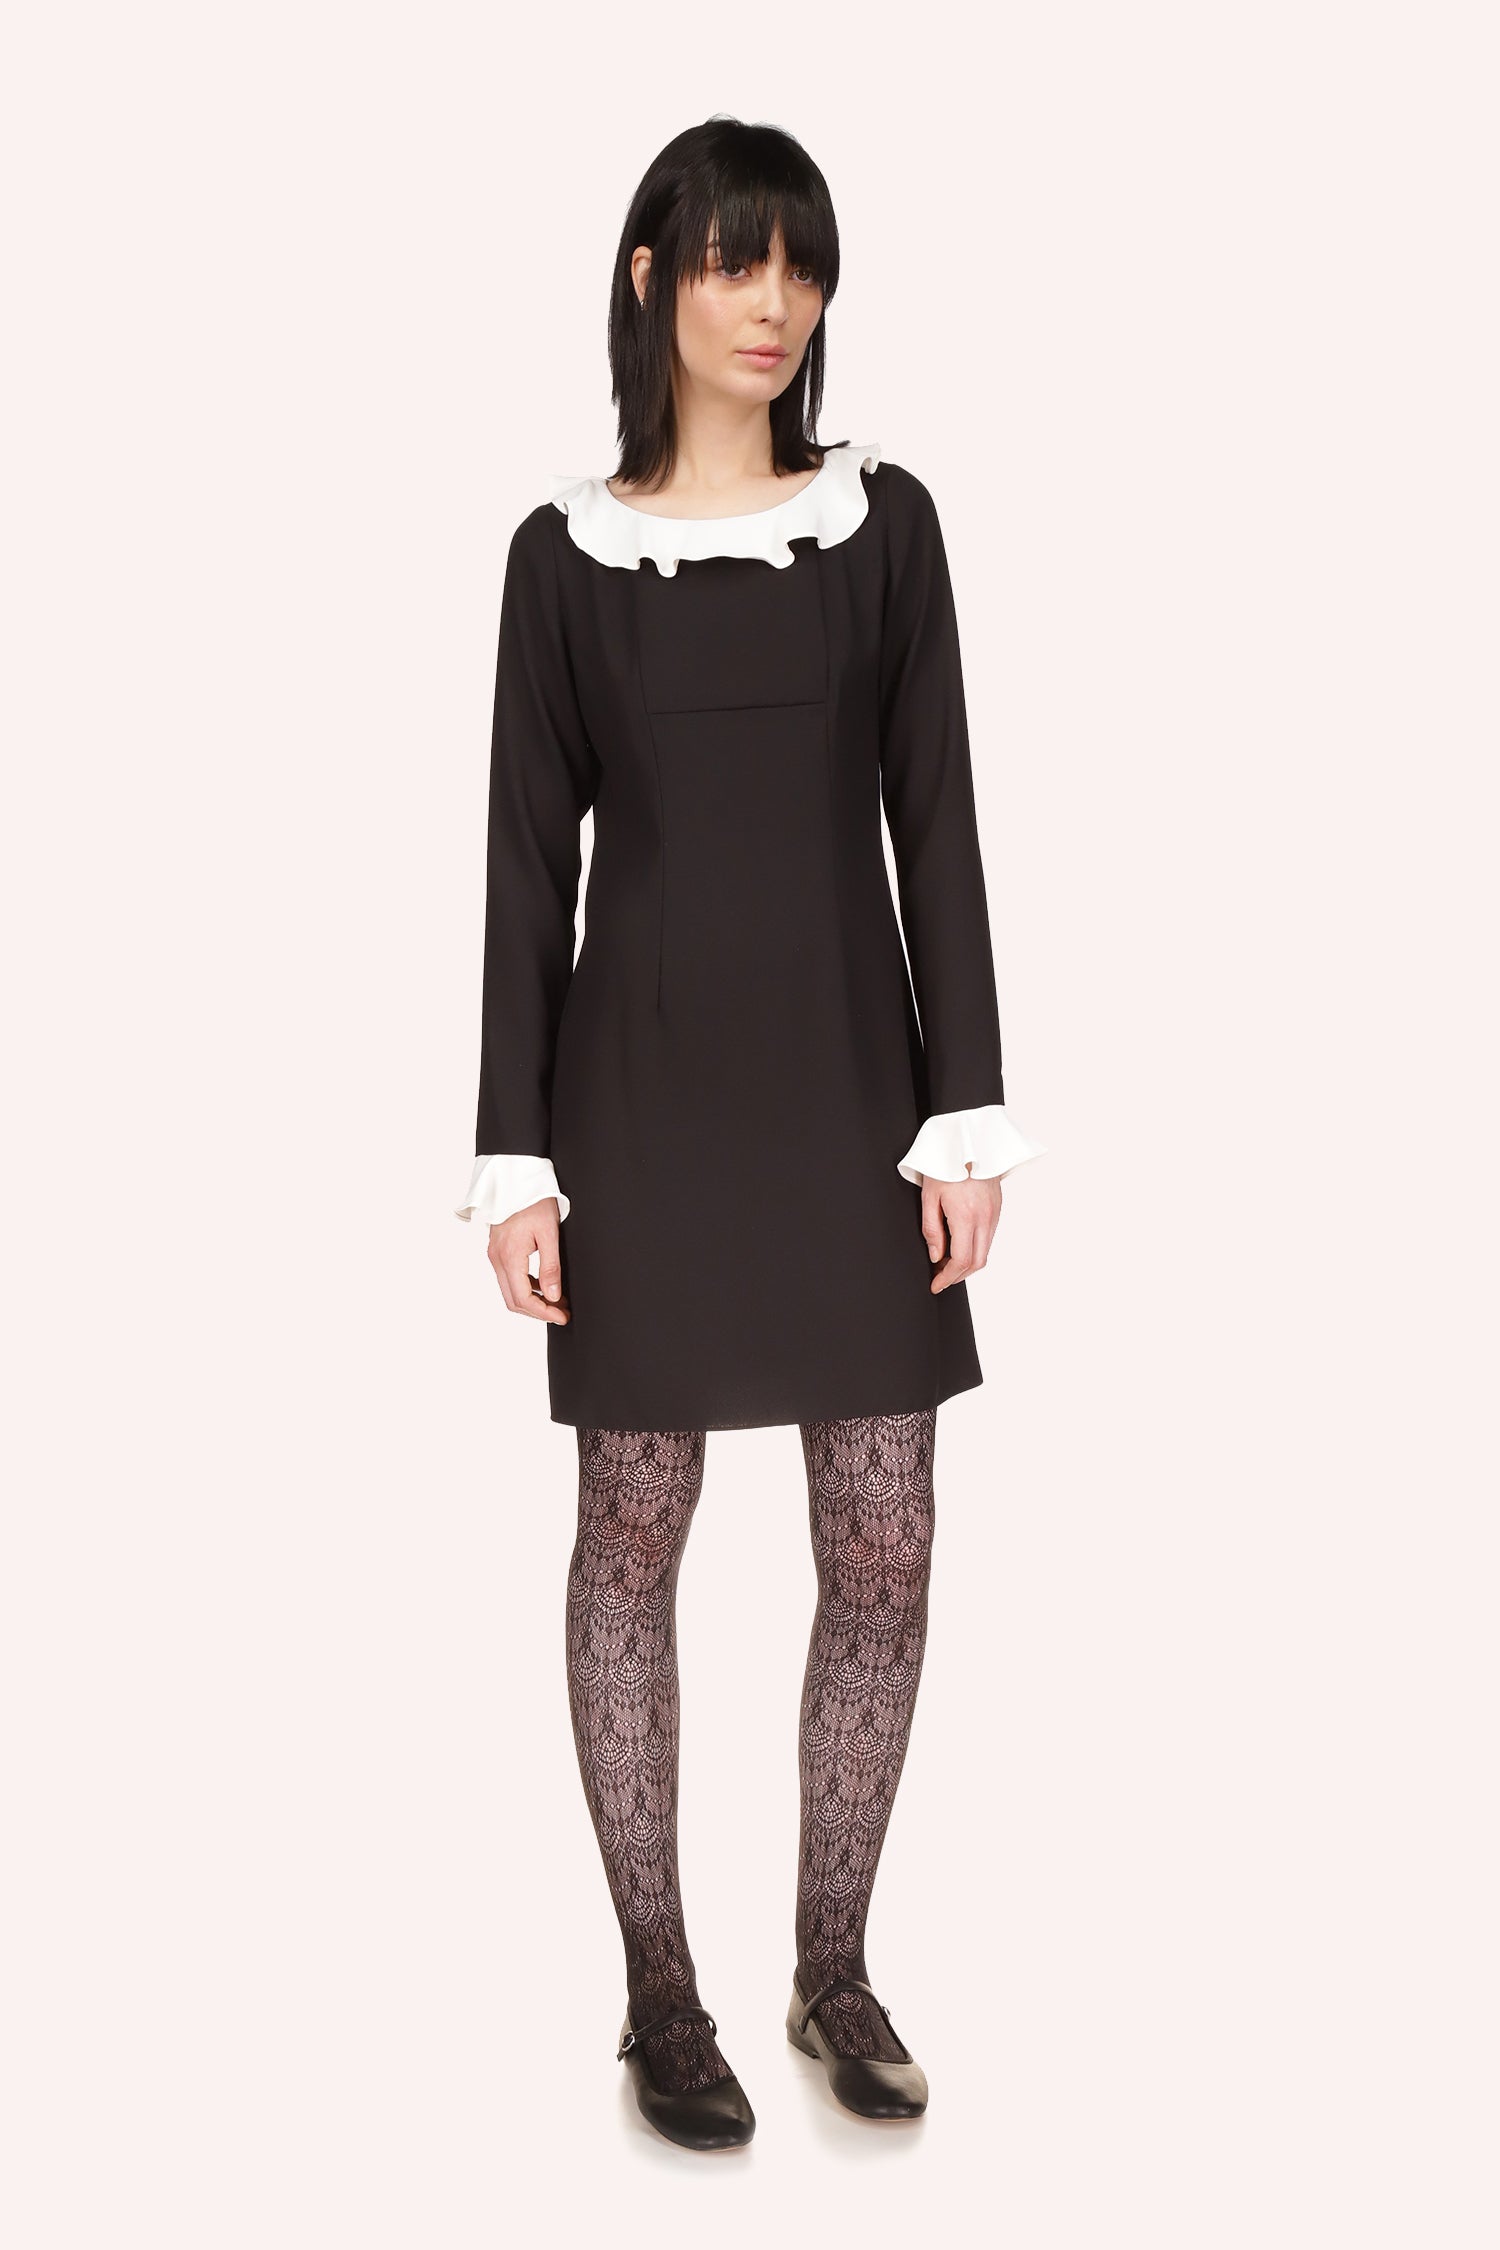 right of a Black Dress, above-the-knee, long sleeves/collar borders vanilla crepe 